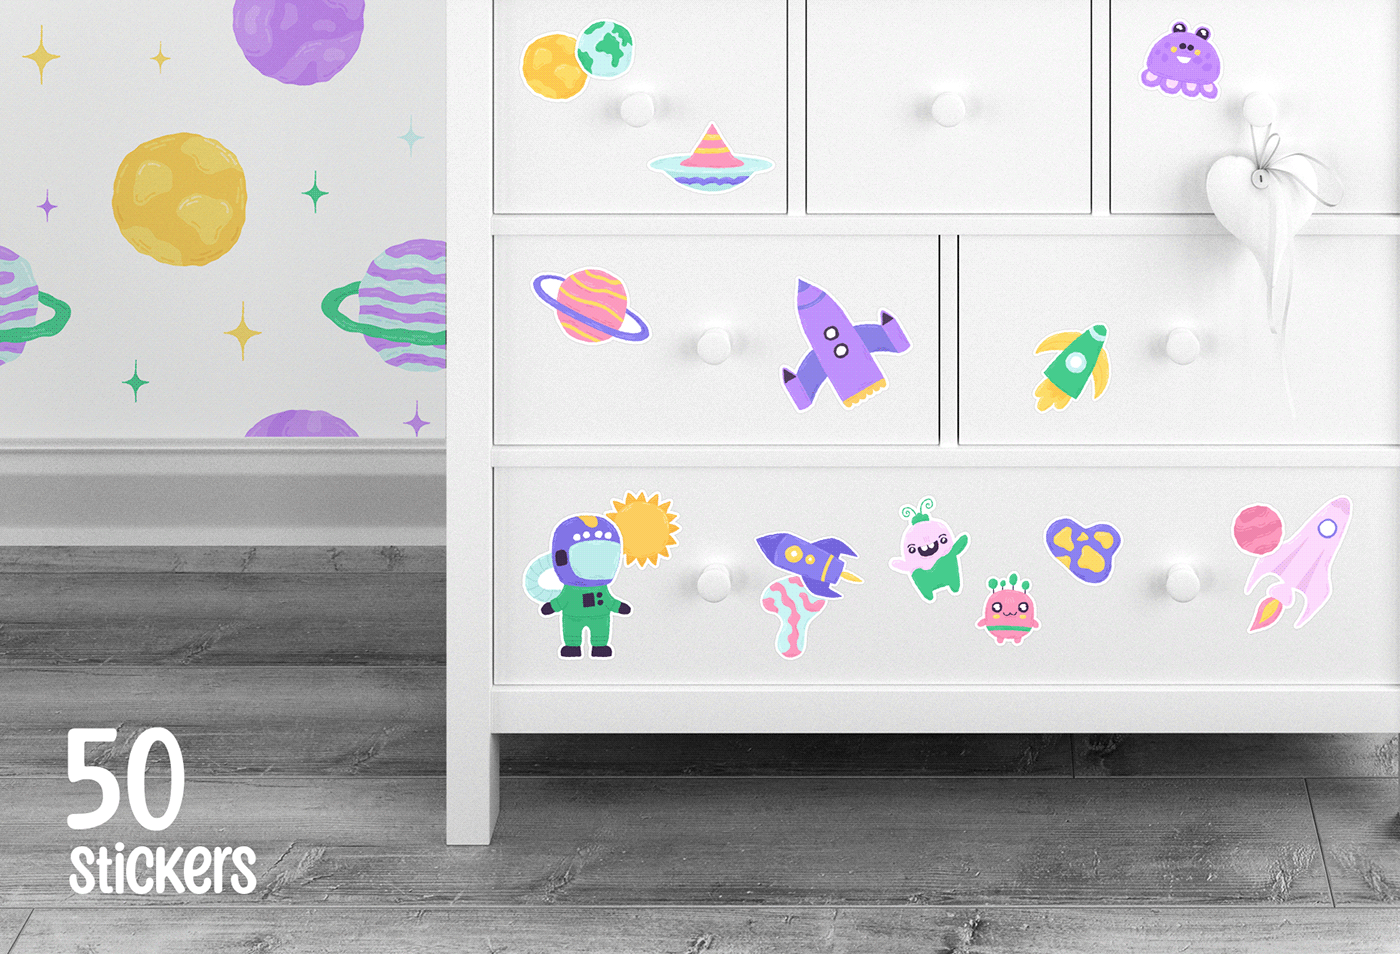 Magic   Space  nursery baby clipart clipart Vector Illustration Patterns posters ILLUSTRATION  nursery clipart